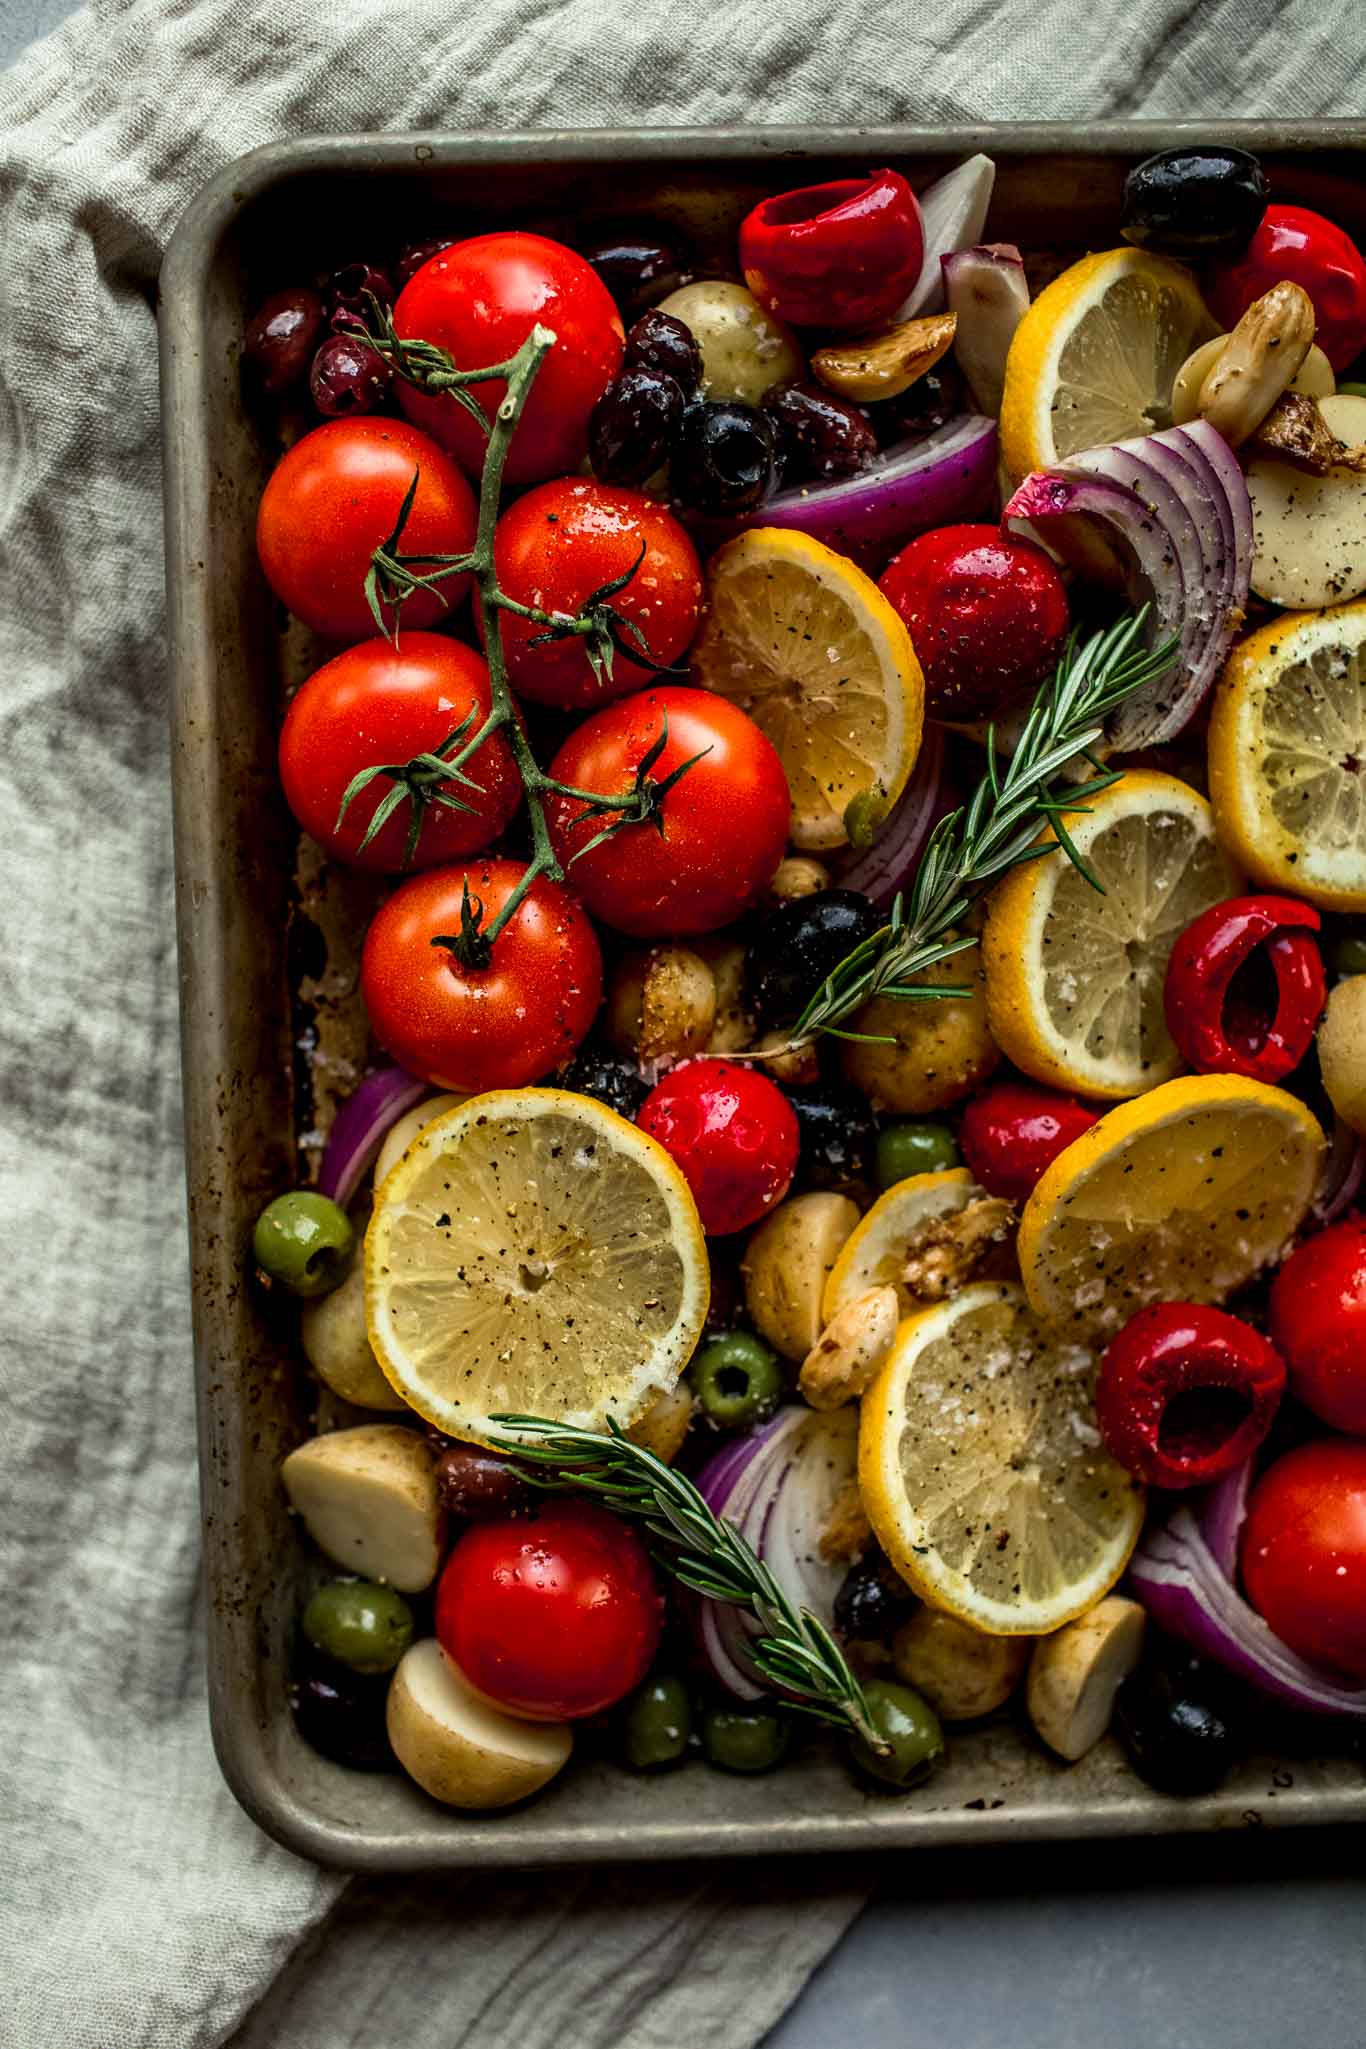 Veggies and olives arranged on sheet pan.